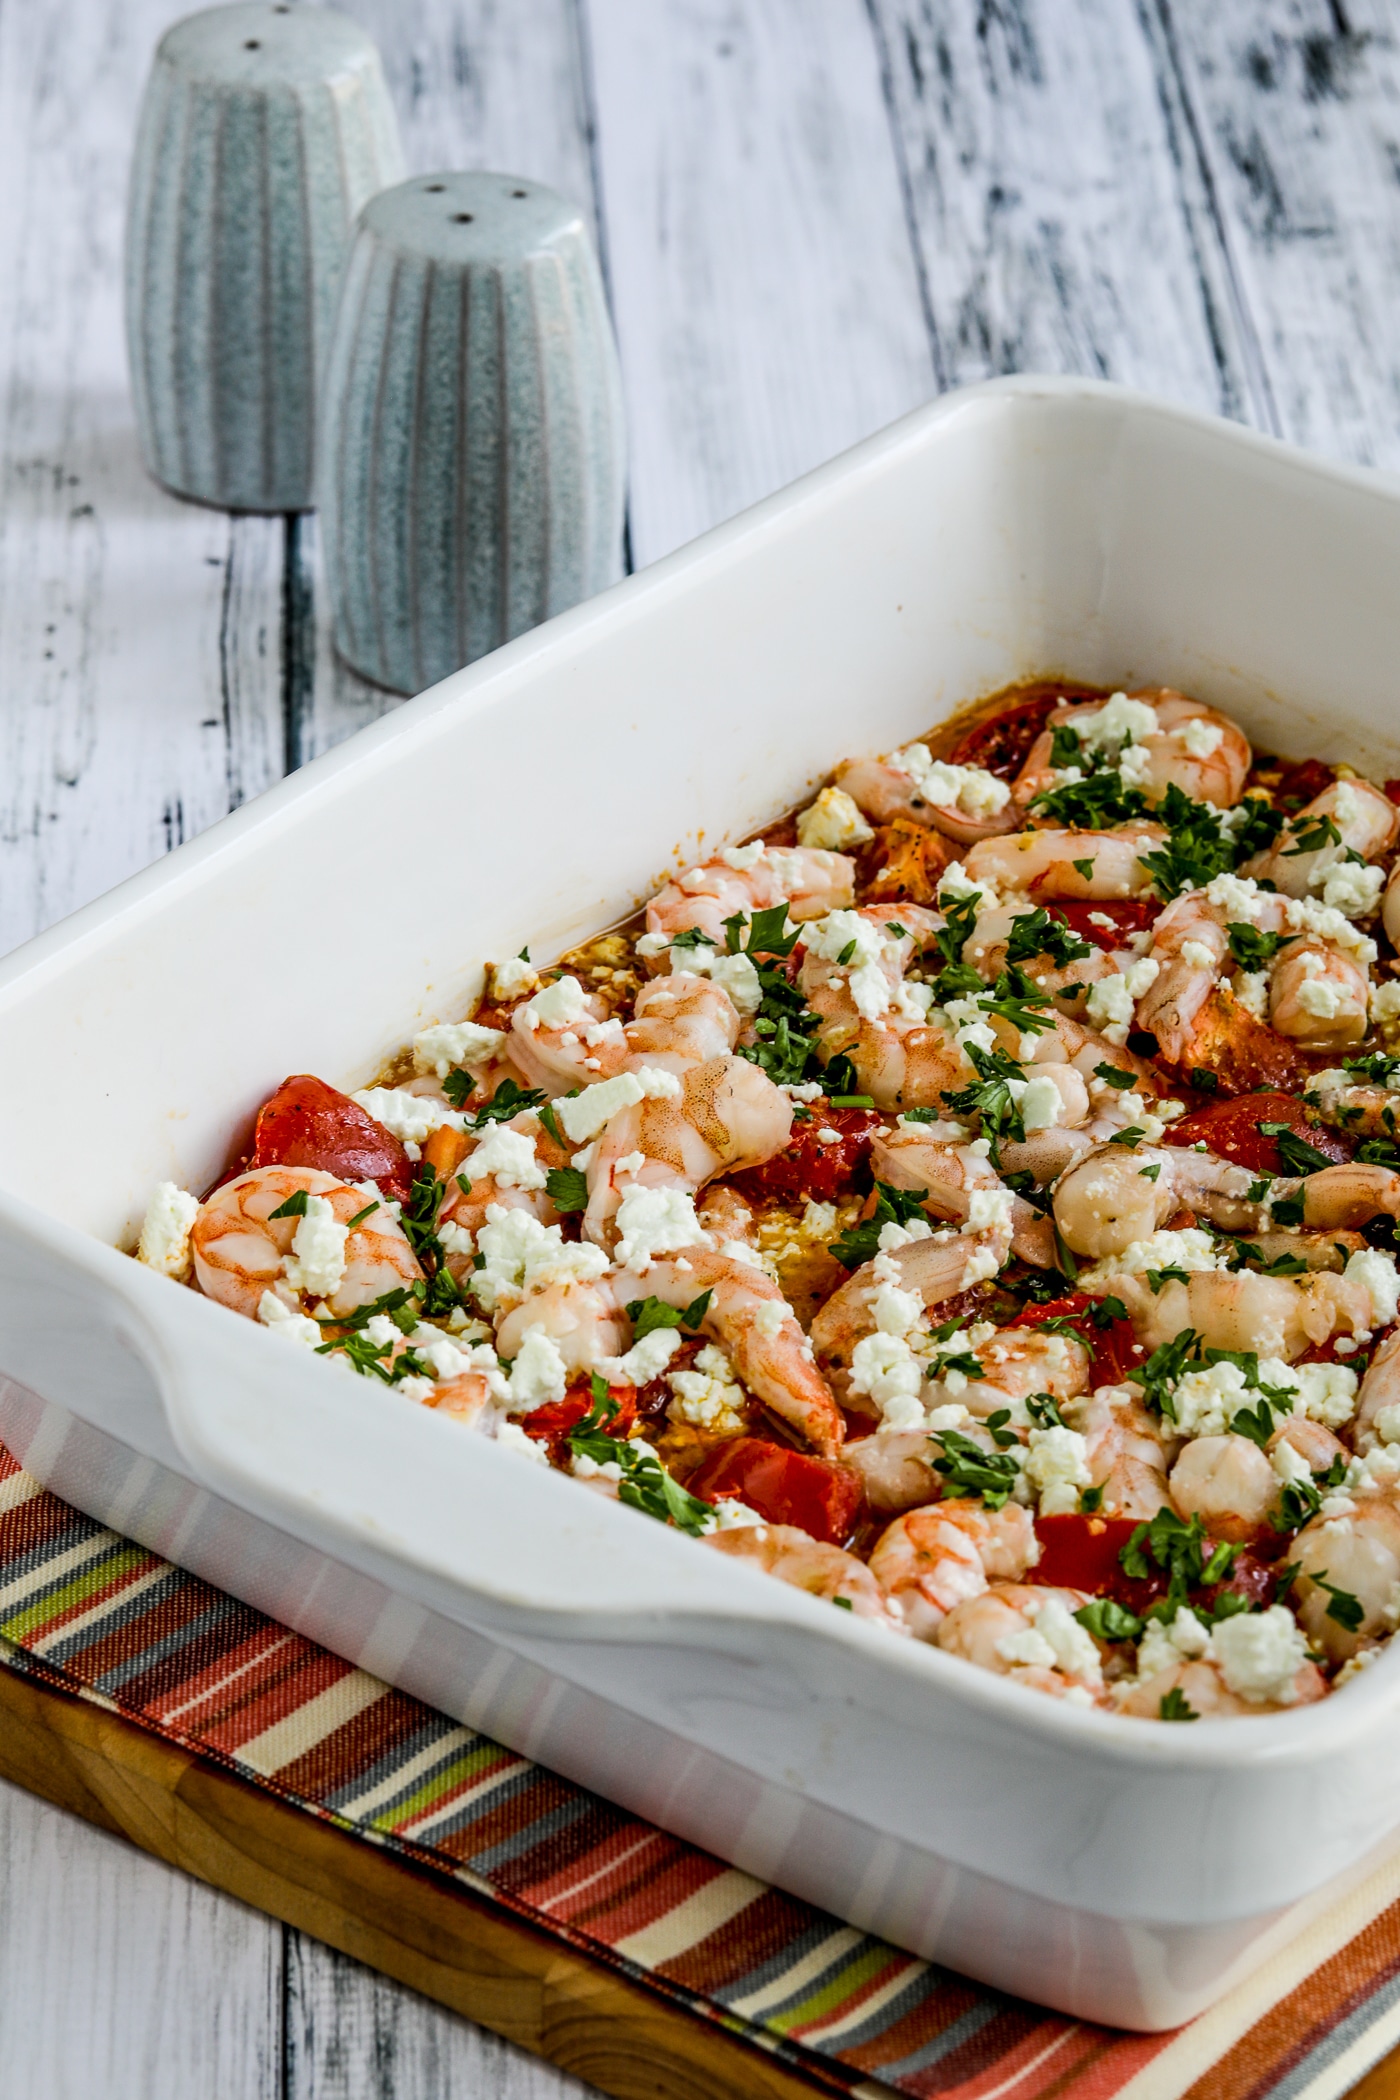 Roasted Tomatoes and Shrimp with Feta shown in serving dish after cooking